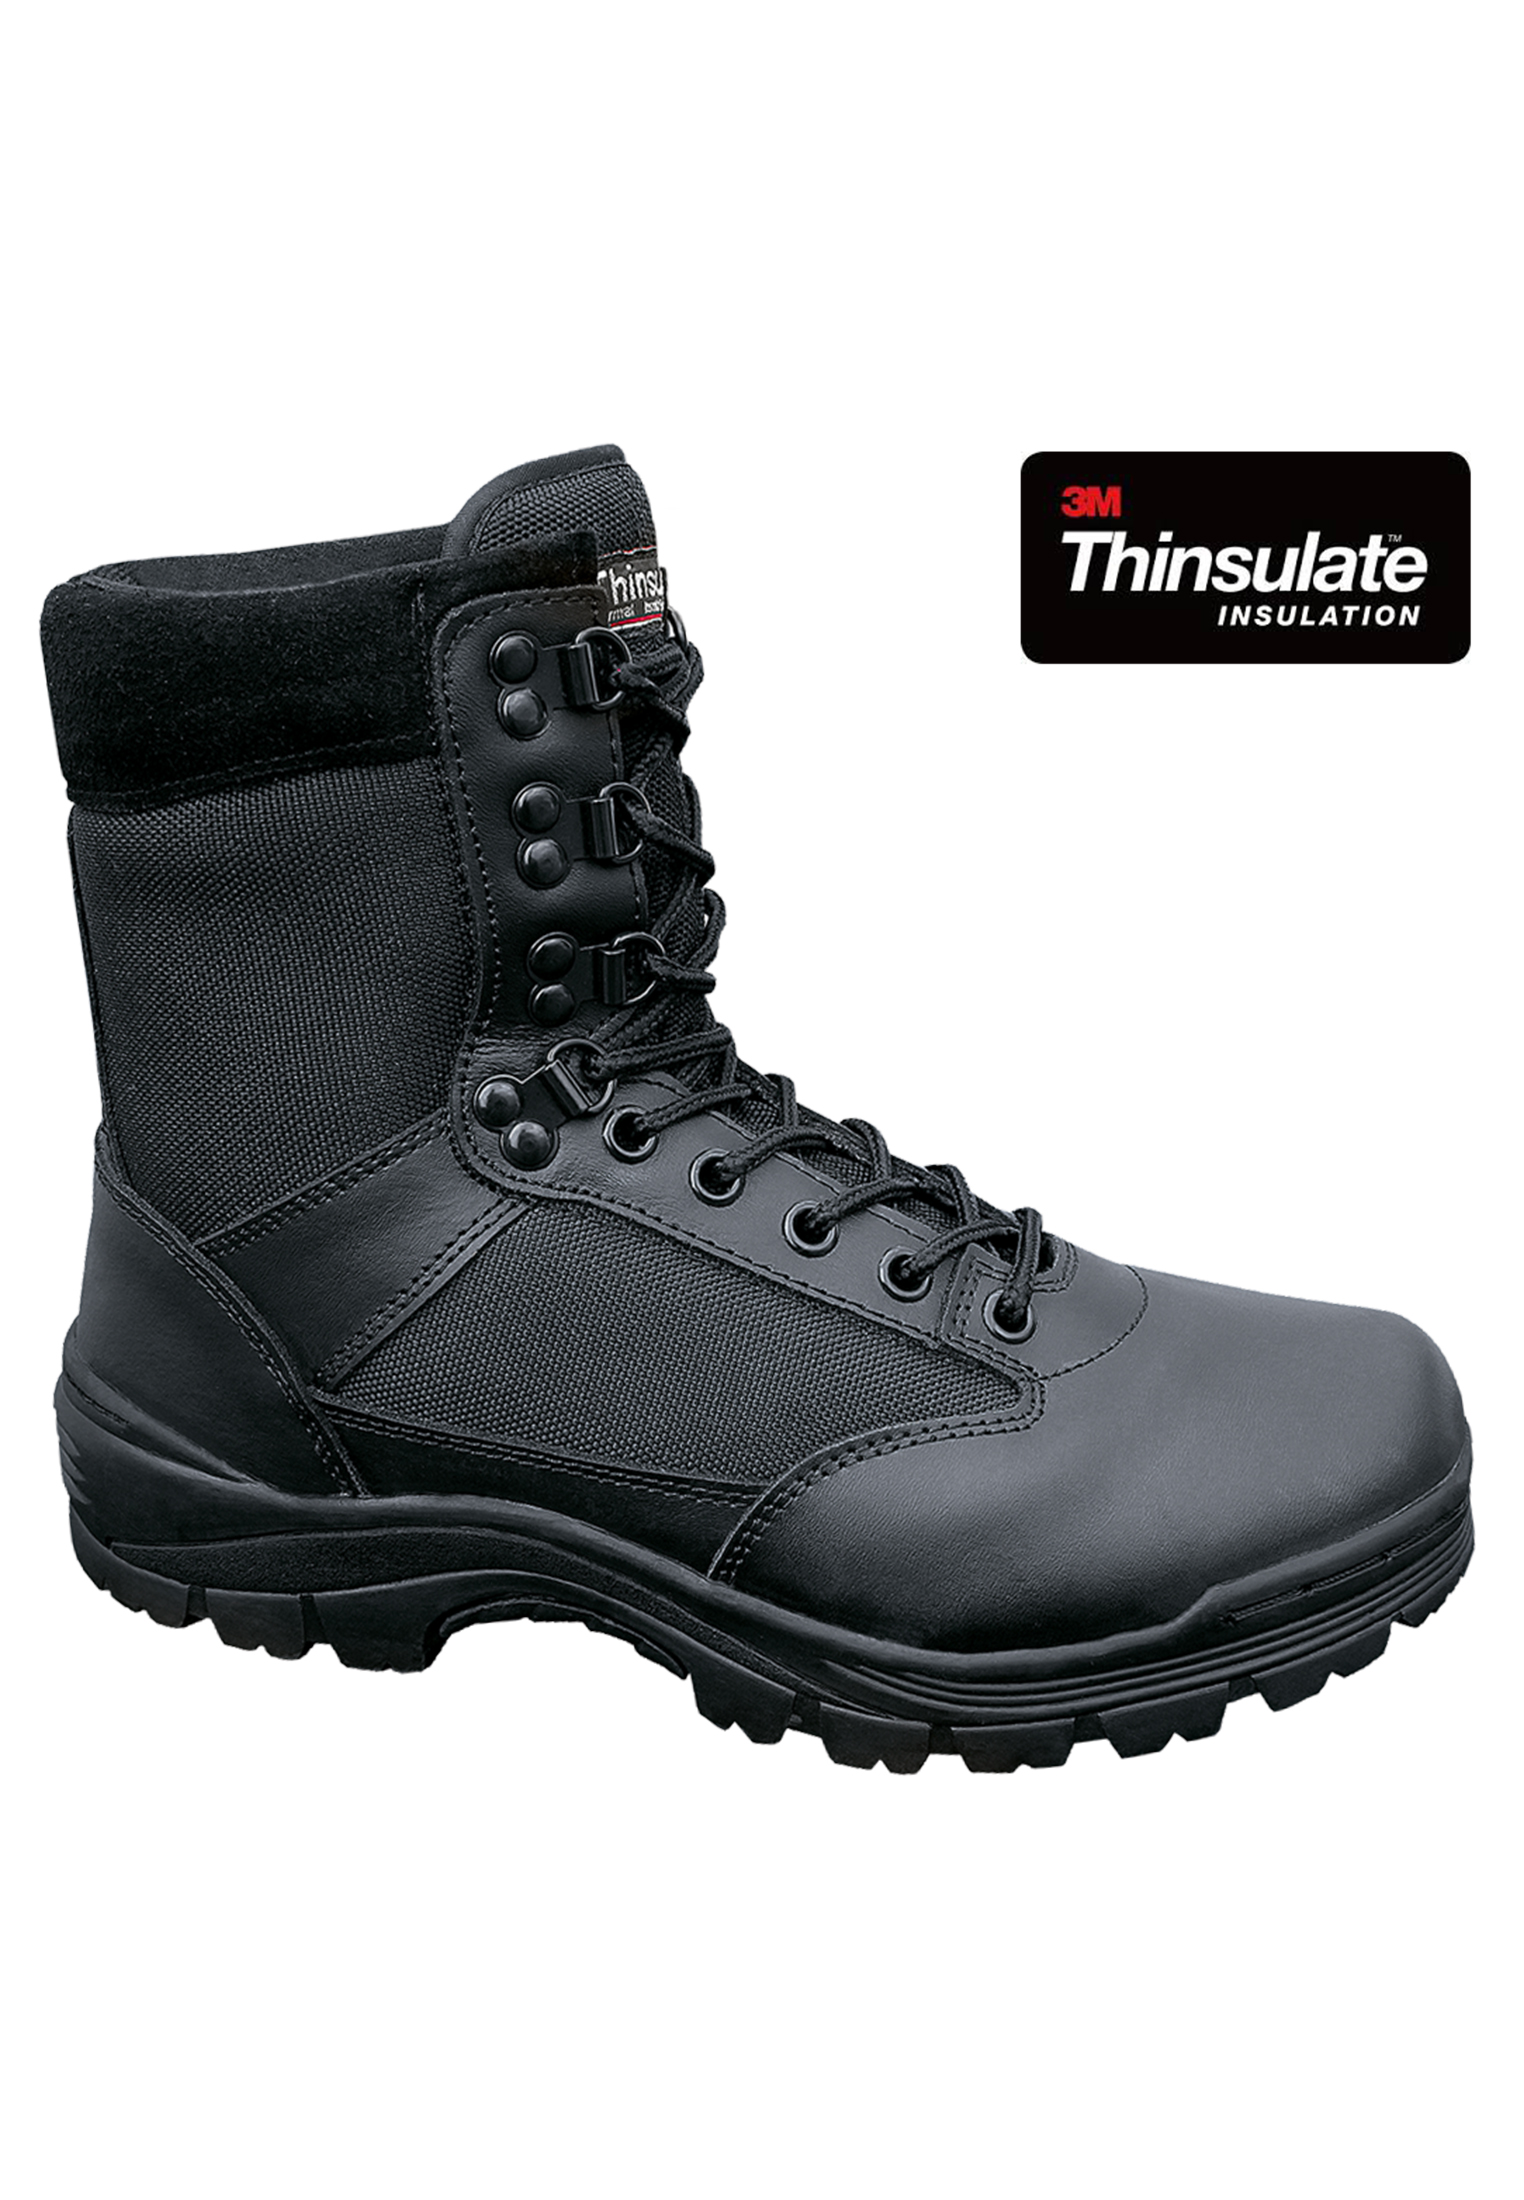 Schuhe Tactical Boot Next Generation in Farbe black